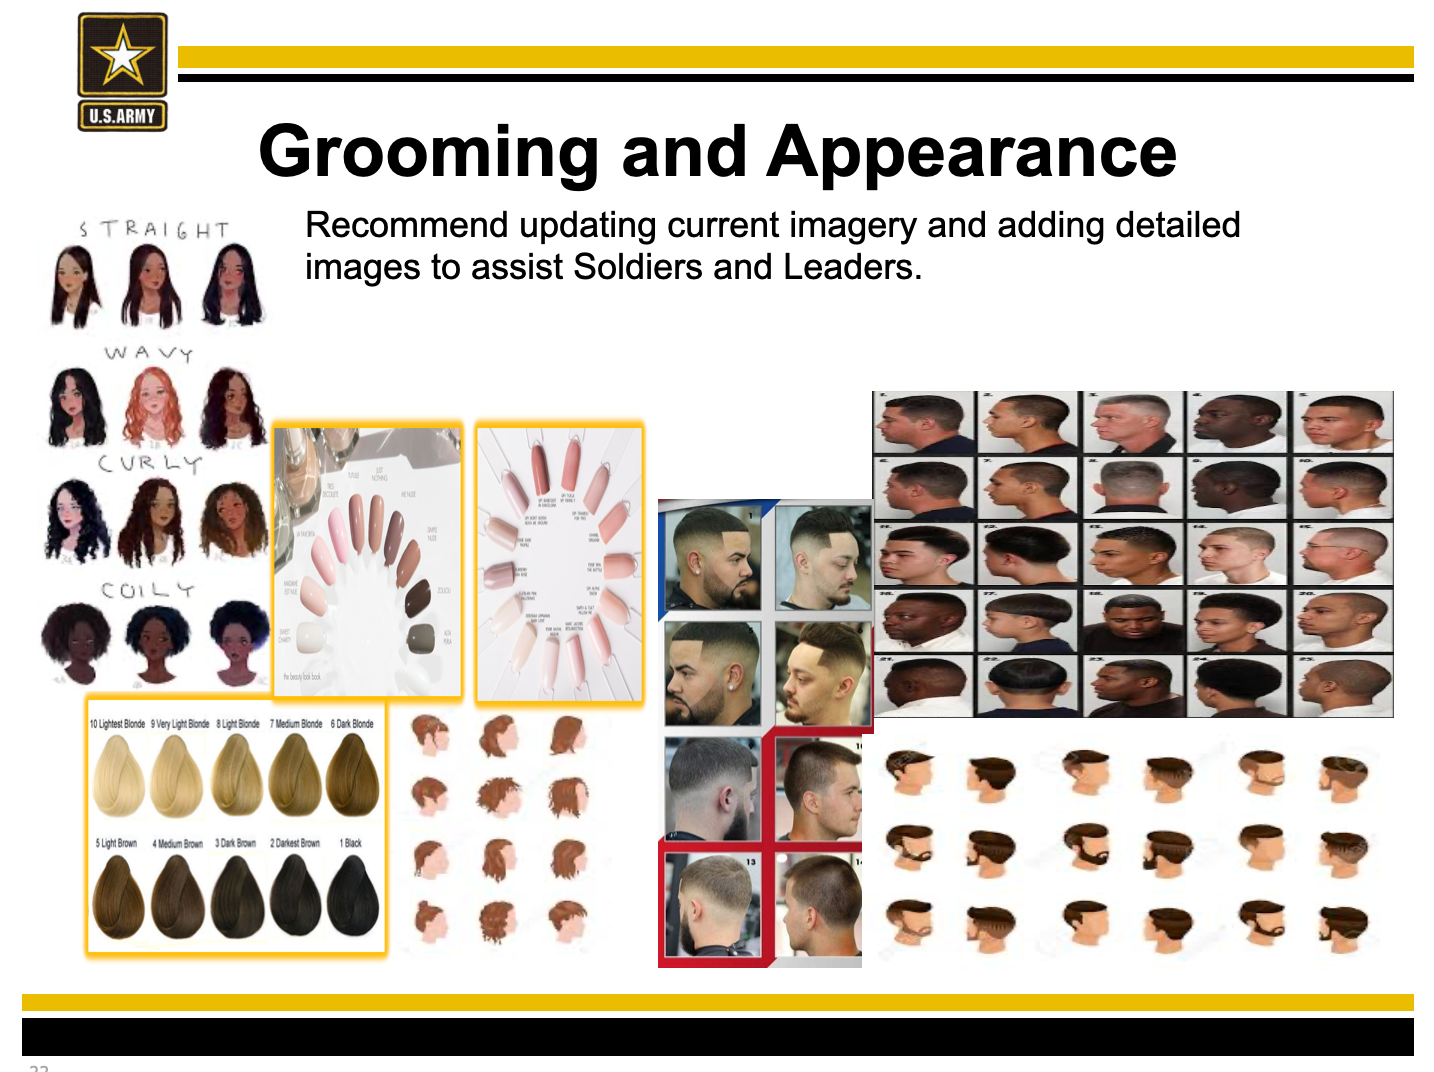 Army Grooming Standards: Hair, Makeup, and Nail Polish - wide 2